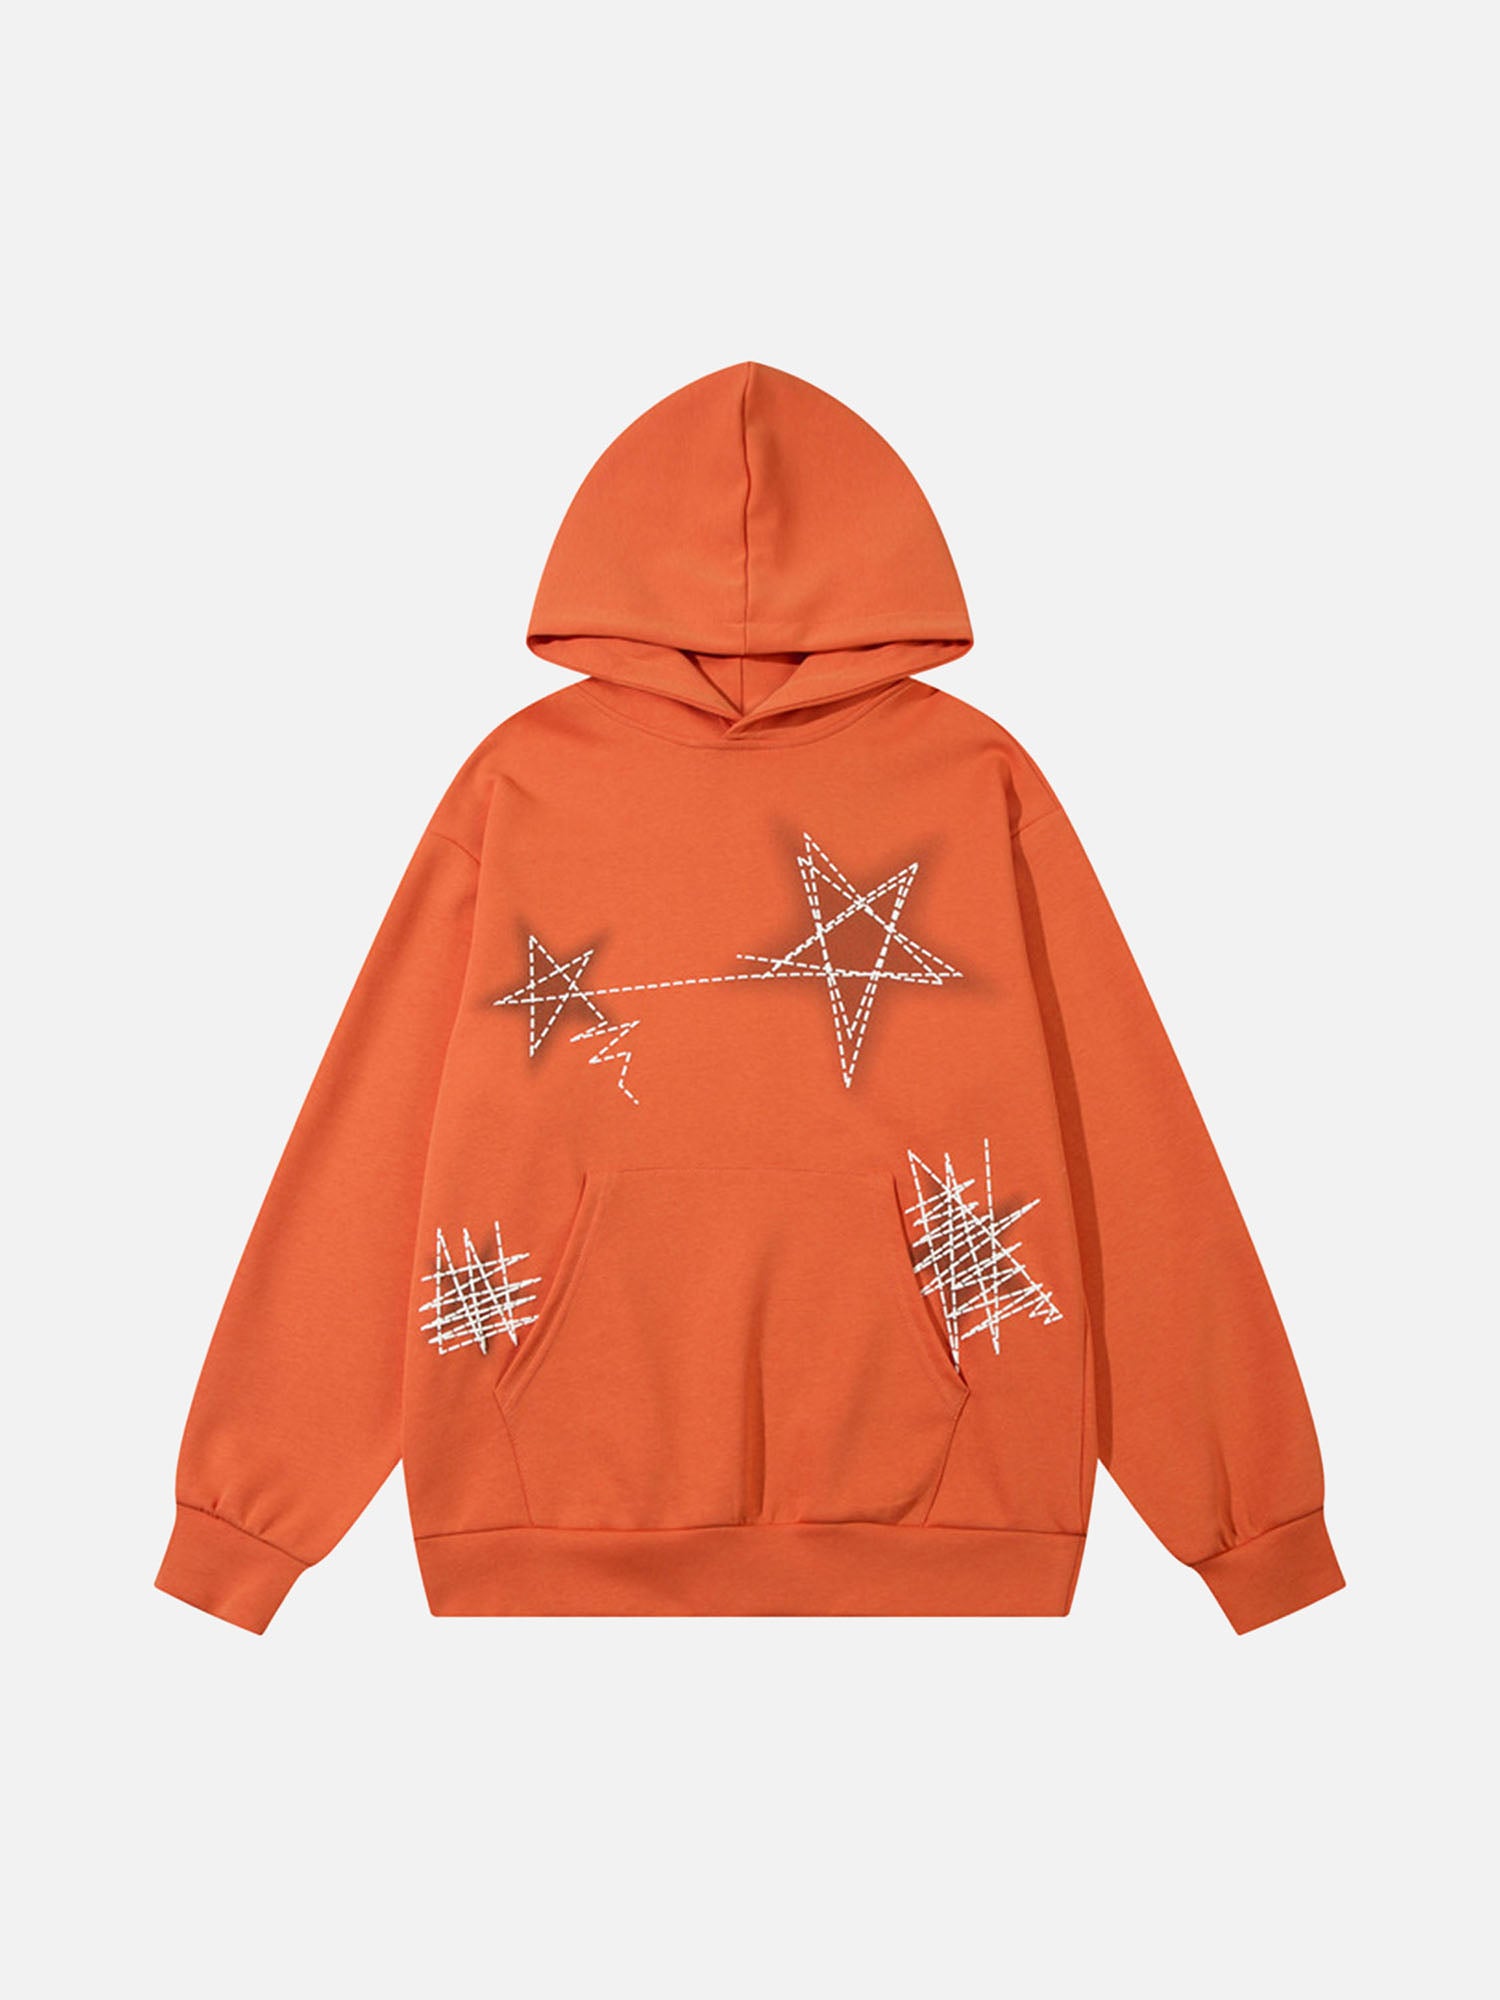 Thesupermade Graffiti Five-pointed Star Hoodie